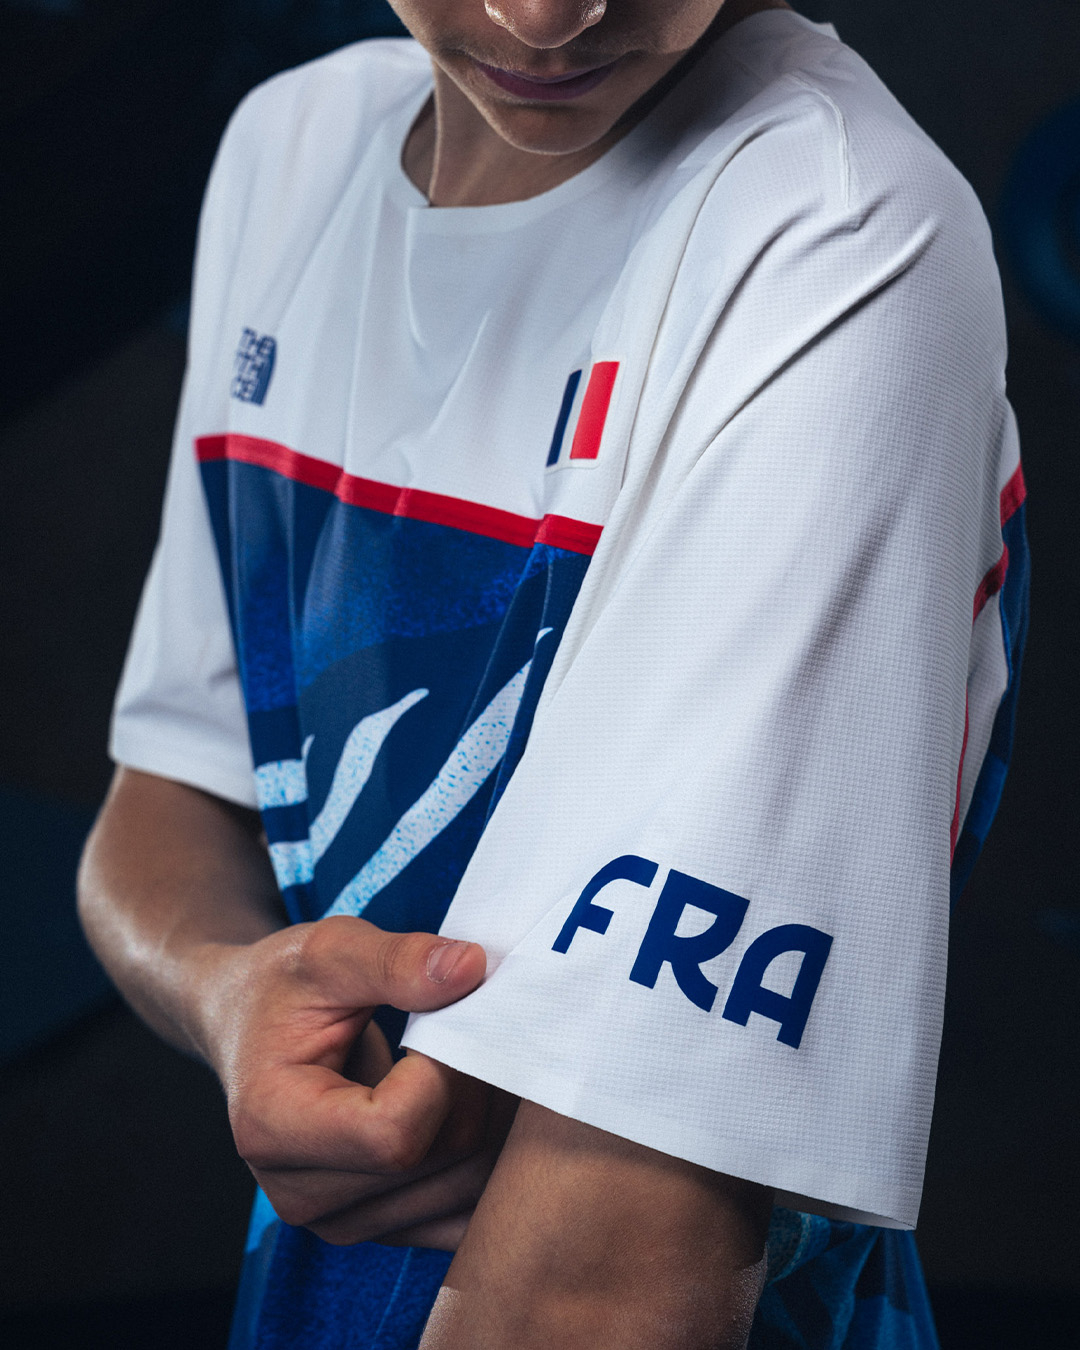 Person adjusting a sports jersey with &quot;FRA&quot; on the sleeve, indicating a French team uniform